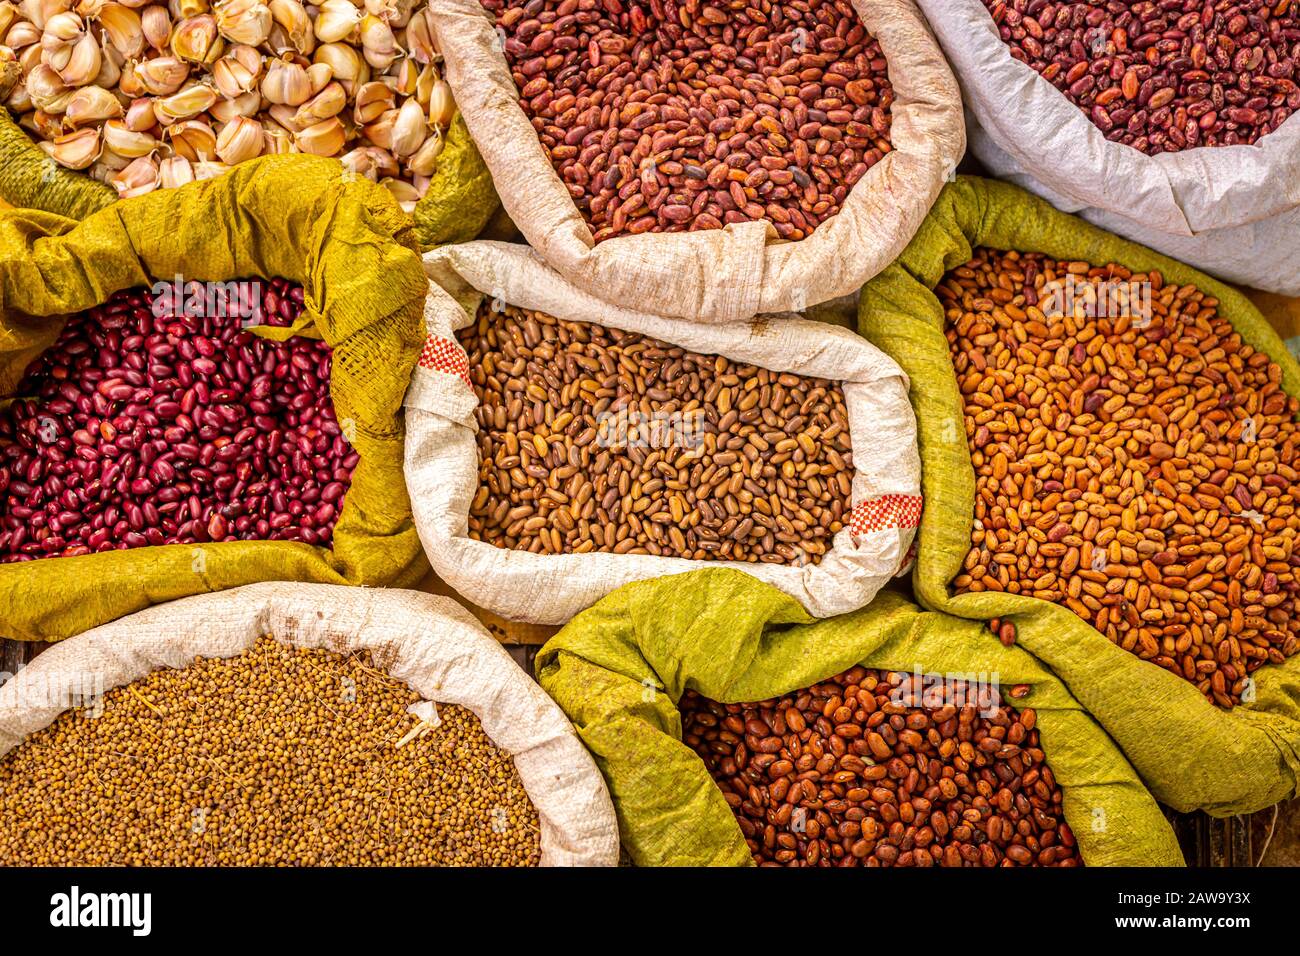 Variety of beans and spices, local market Stock Photo